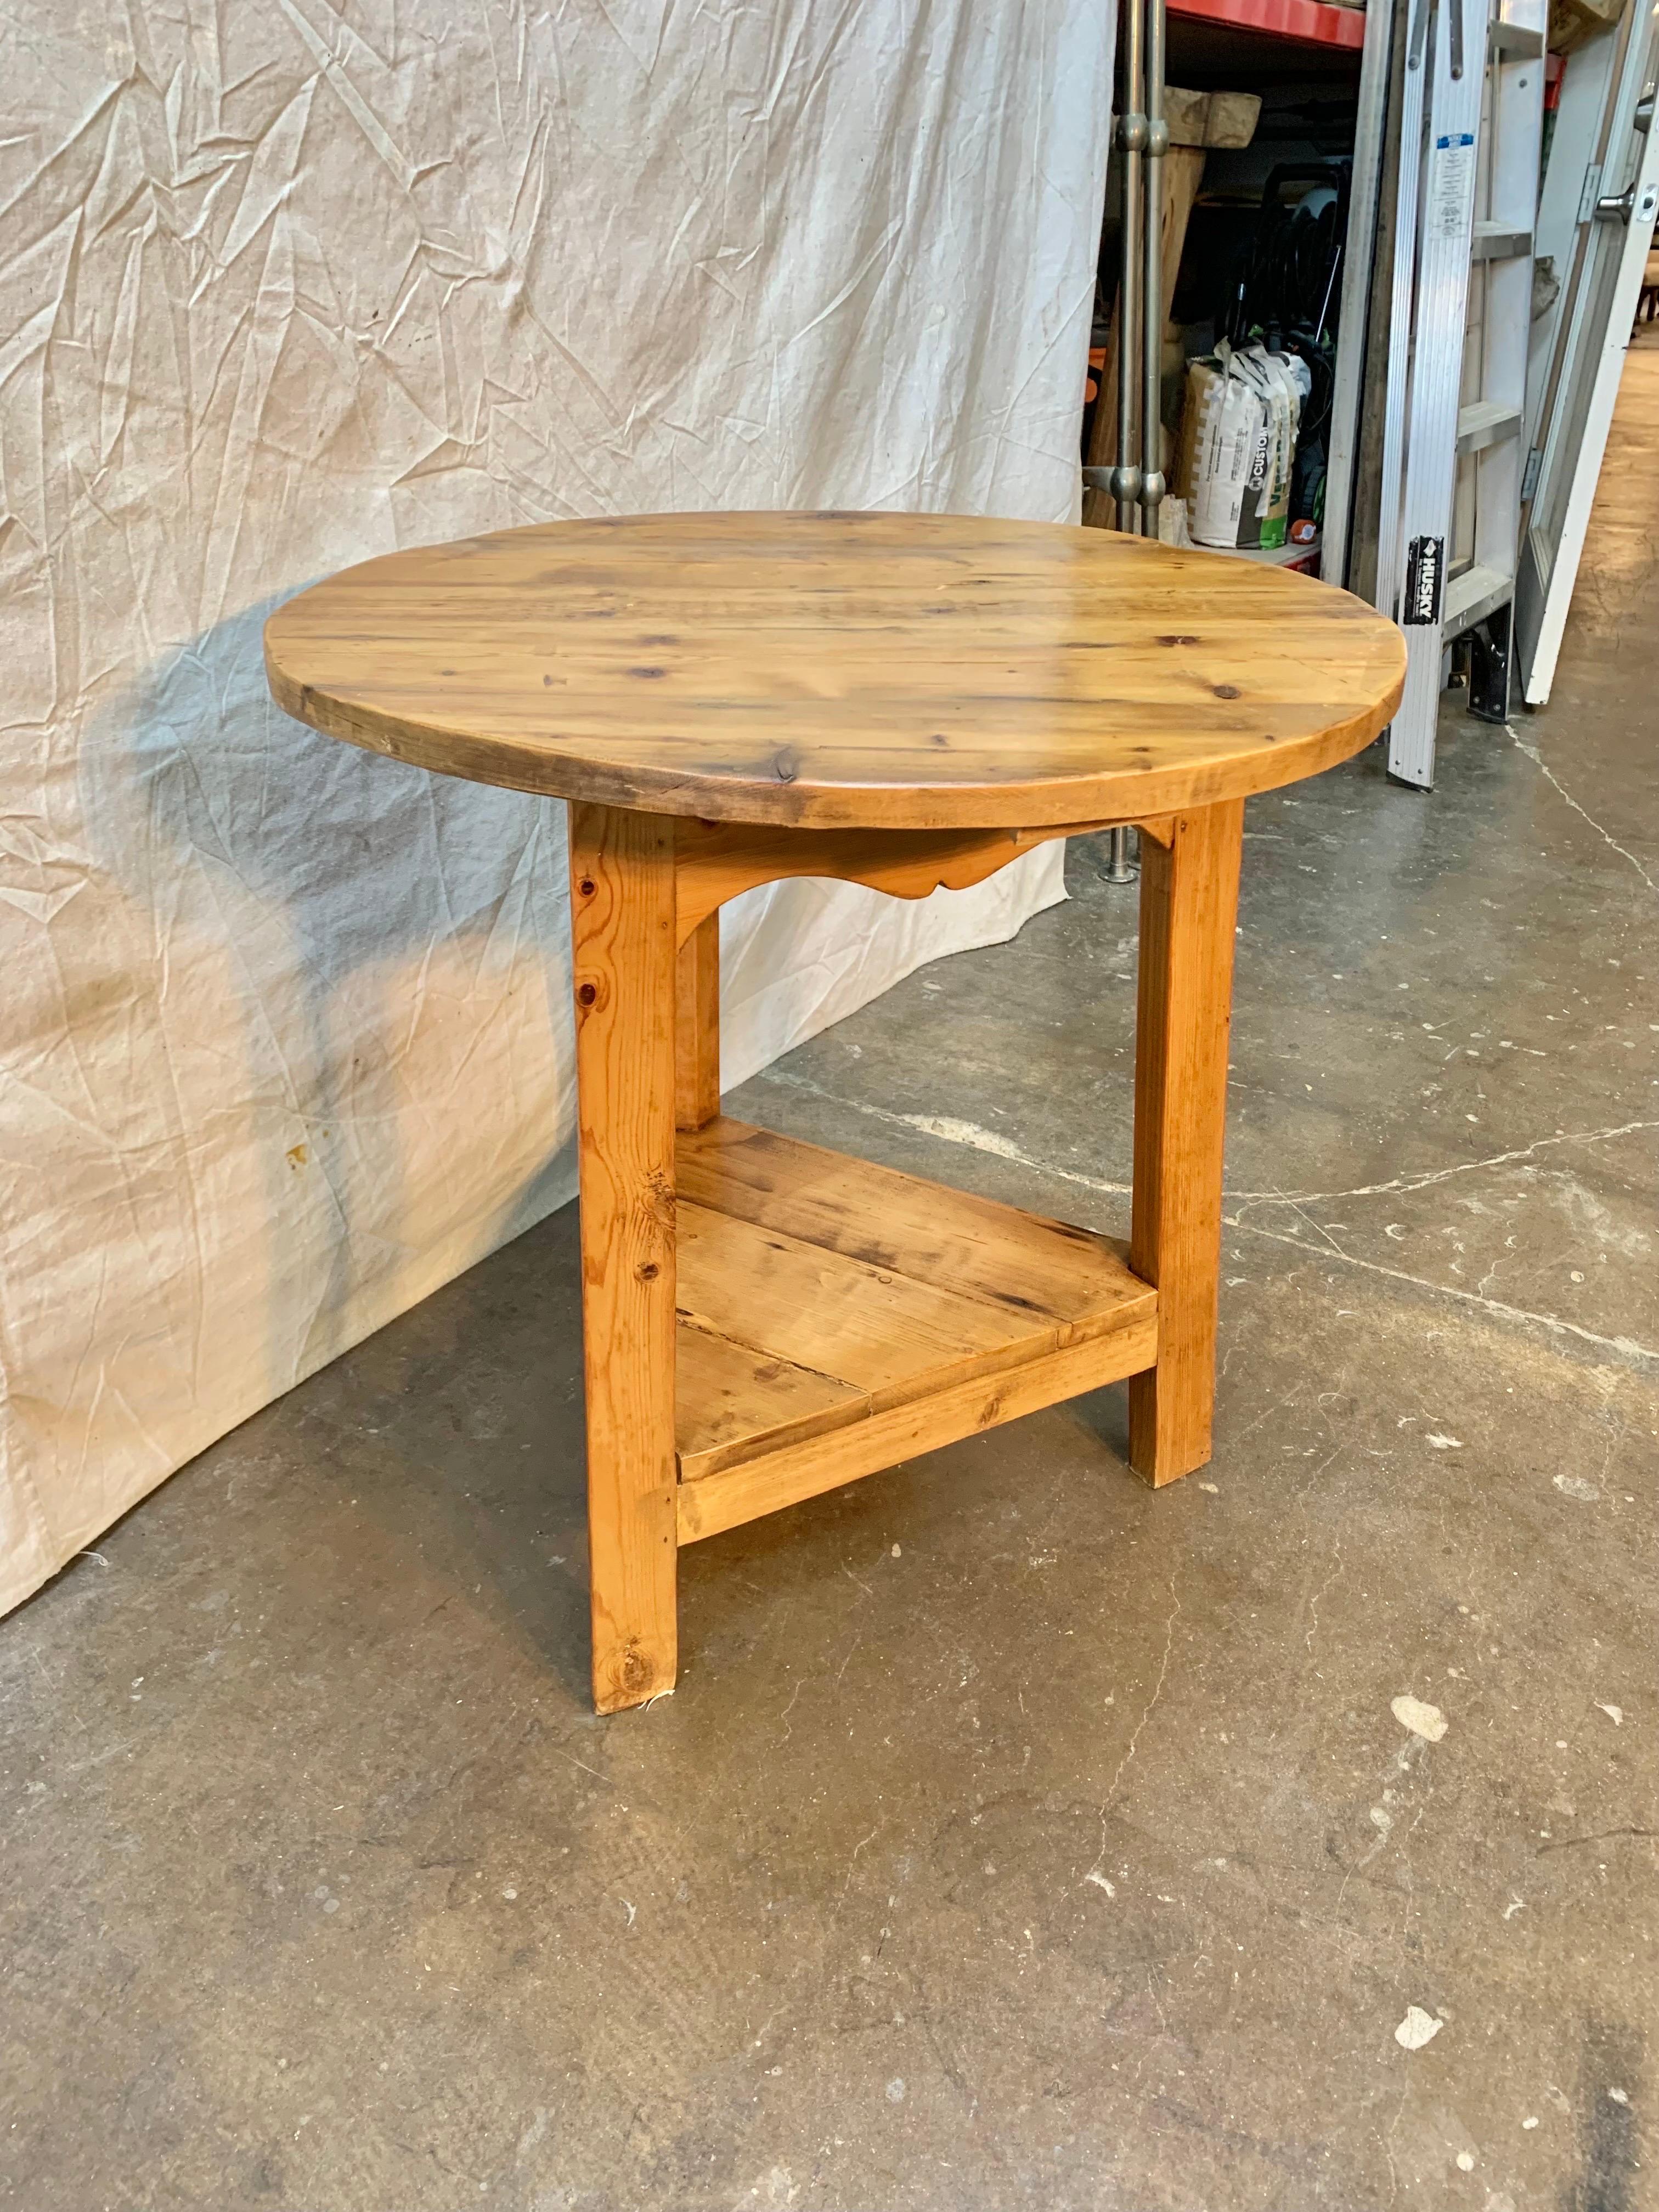 This English Cricket Table was crafted in the late 1900's from old growth pine. The piece features a circular top resting on three angled legs that have been adjoined with a triangular lower shelf. Cricket tables are in essence English pieces of